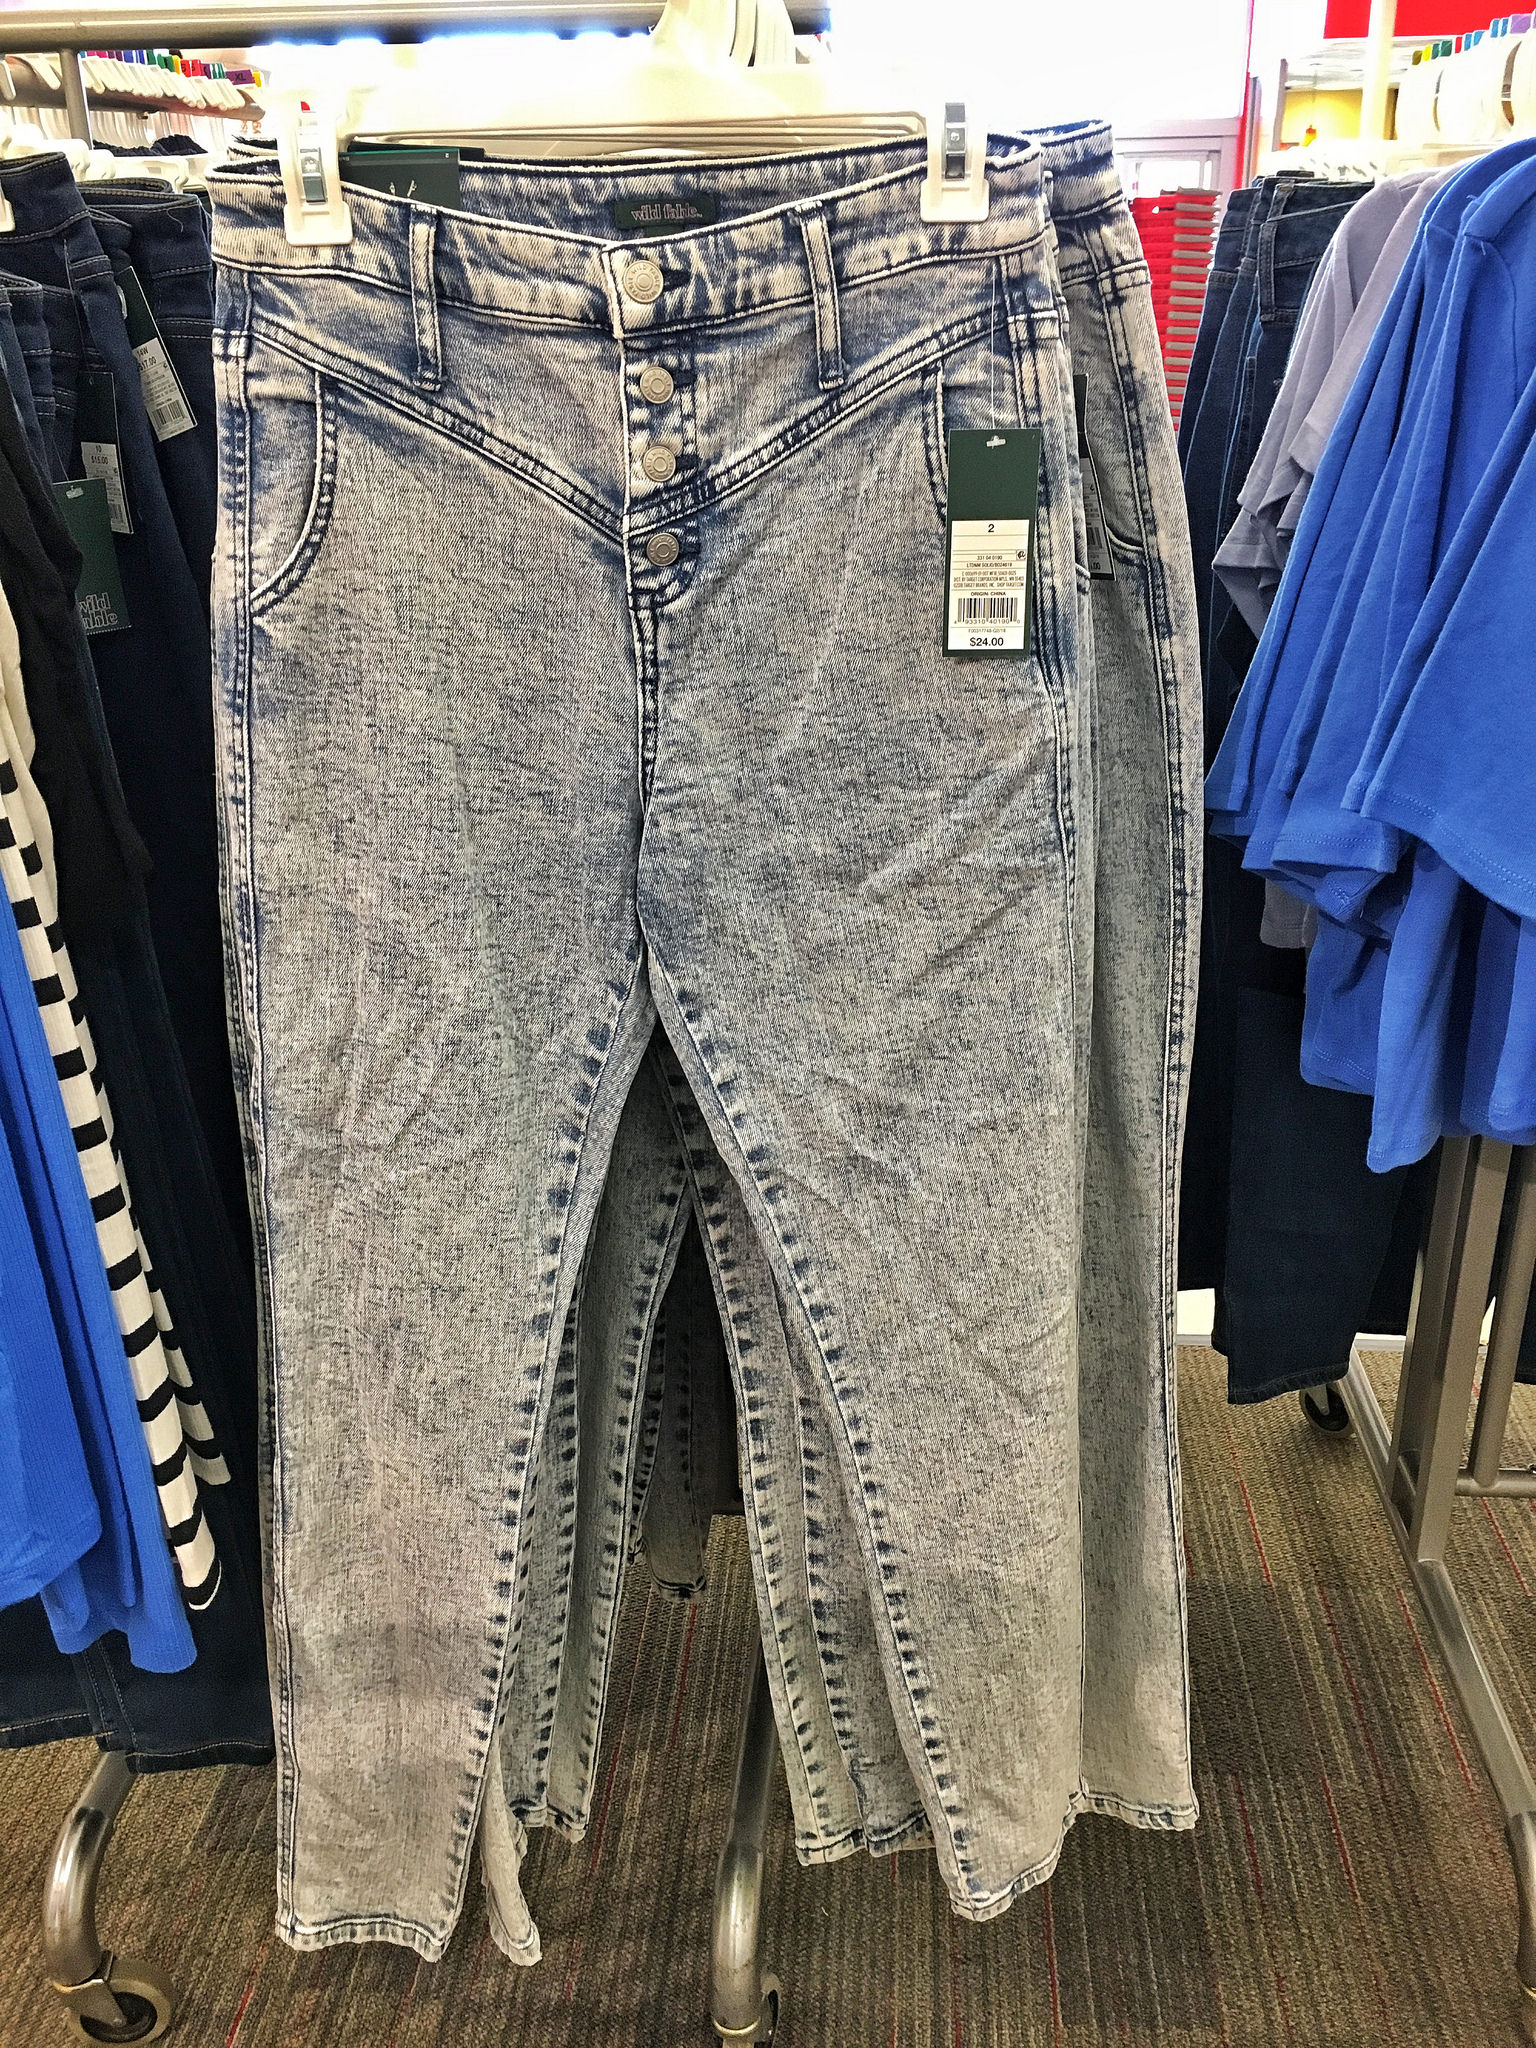 mom jeans at target